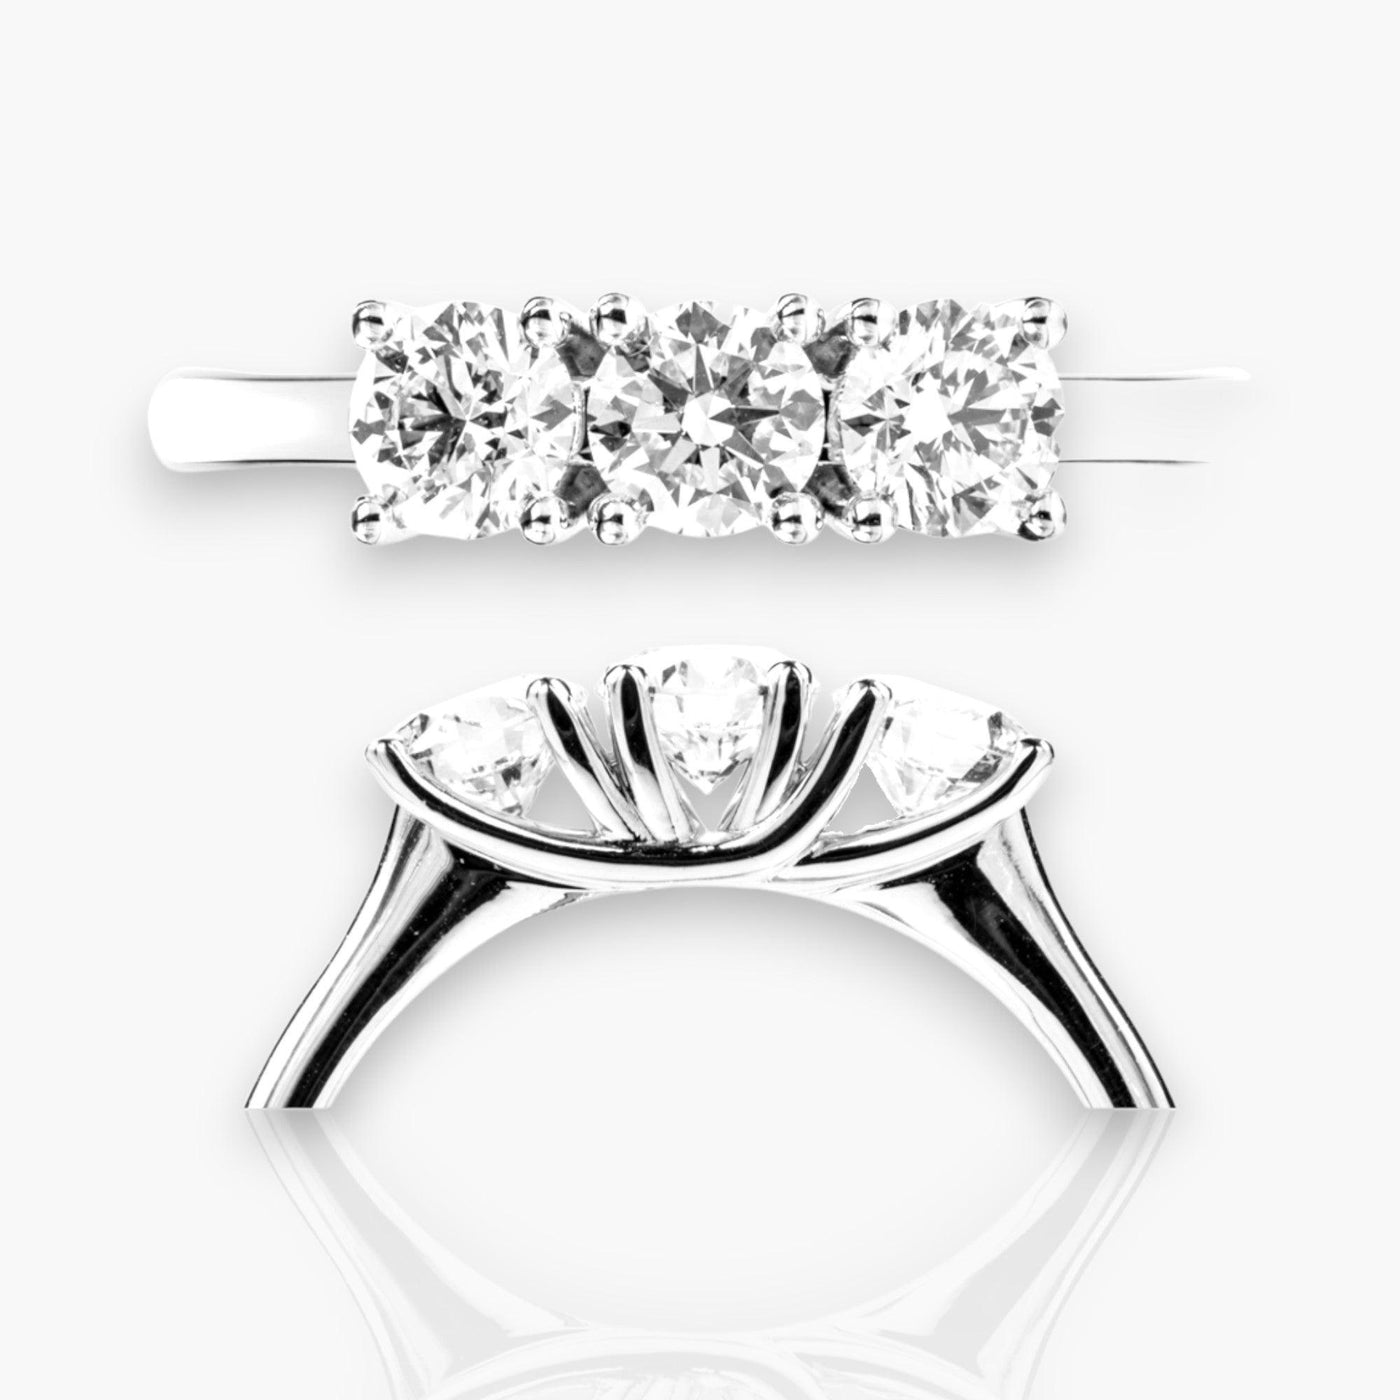 TRILOGY 7 - Riviera Engagement Ring - Moregola Fine Jewelry